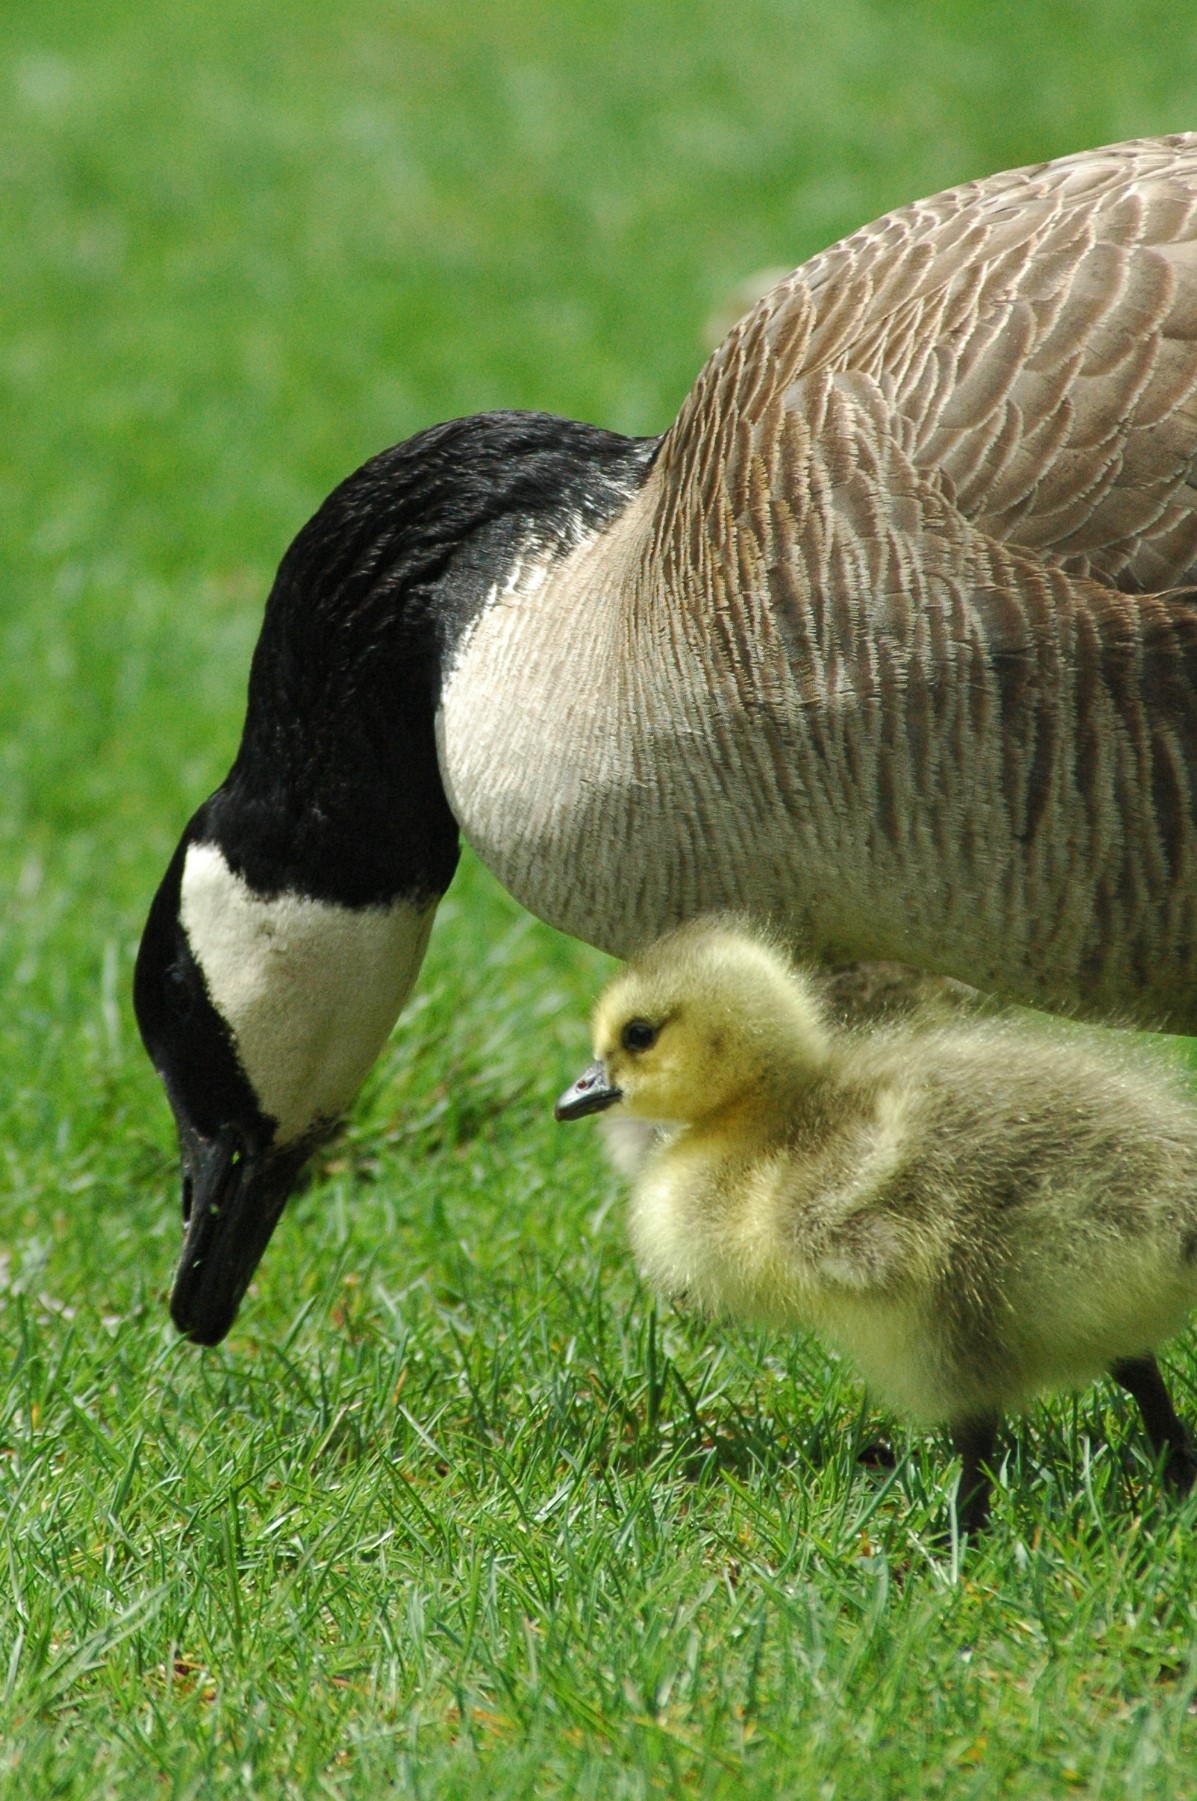 Goose leans down to eat grass with gosling nearby